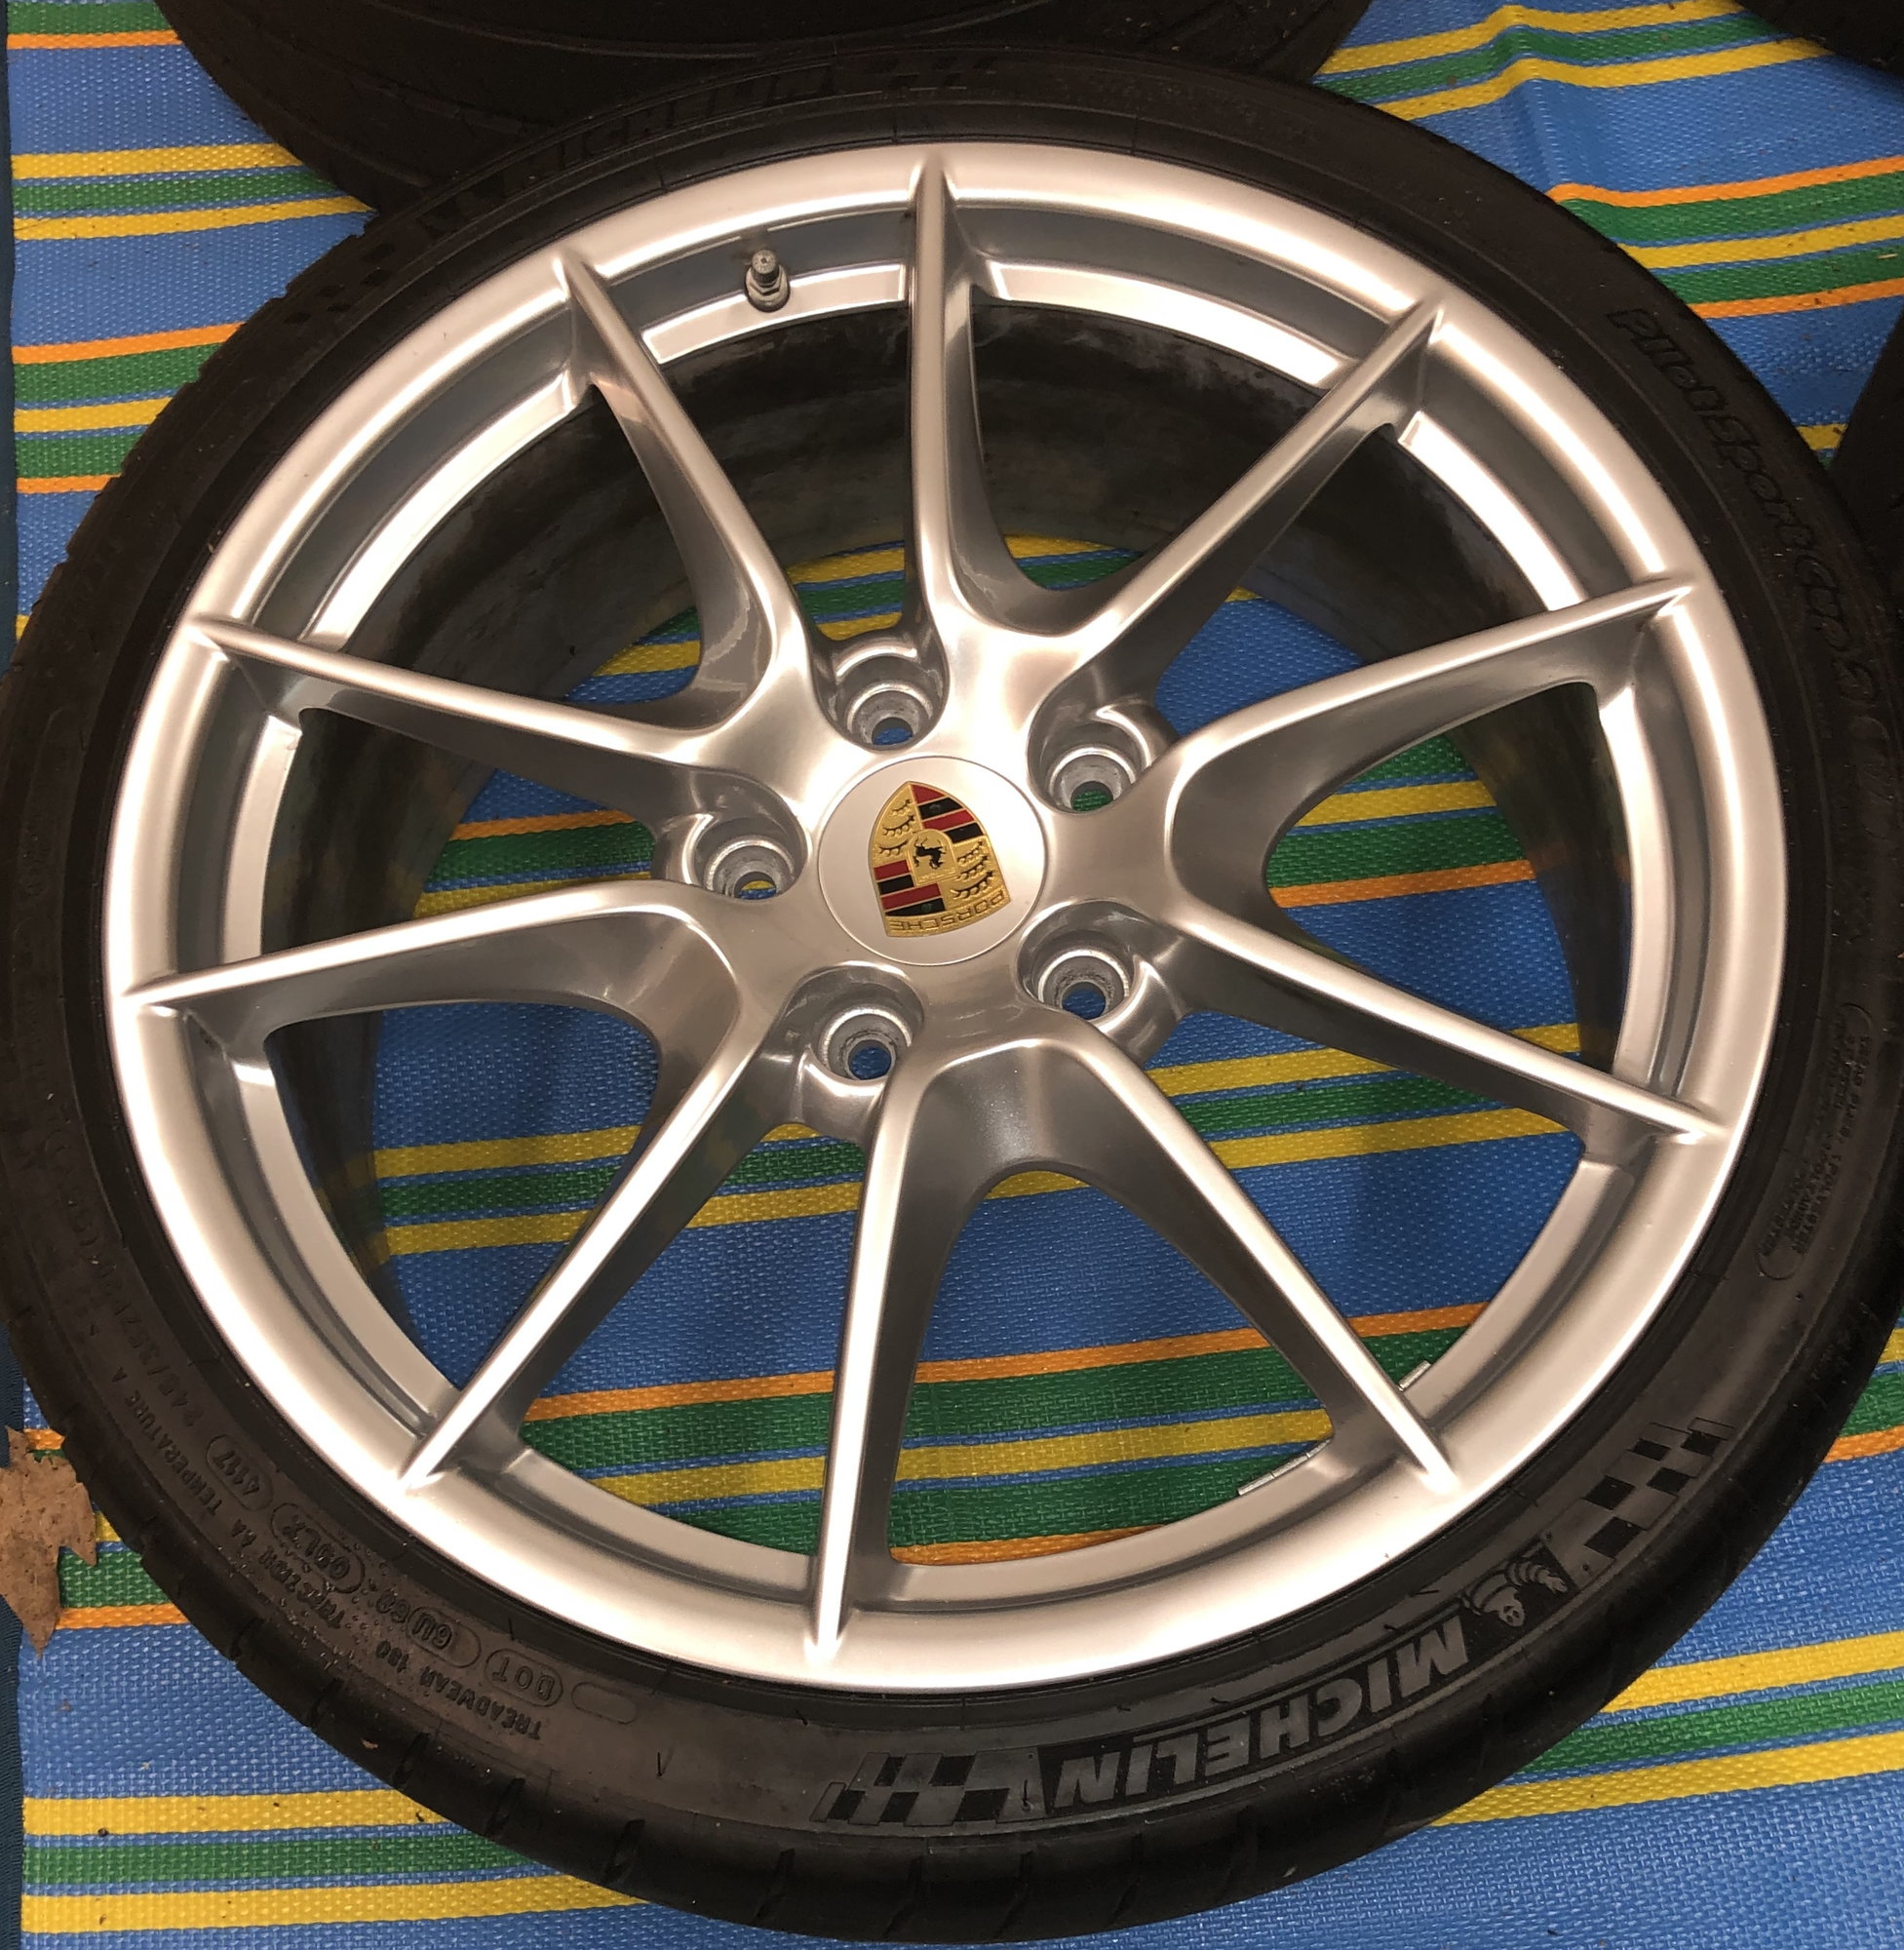 Wheels and Tires/Axles - Porsche 911 991 OEM Carrera S Wheel Tire Set 20" Michelin Pilot Sport Cup 2 N1 - Used - 2012 to 2019 Porsche 911 - Weston, MA 02481, United States